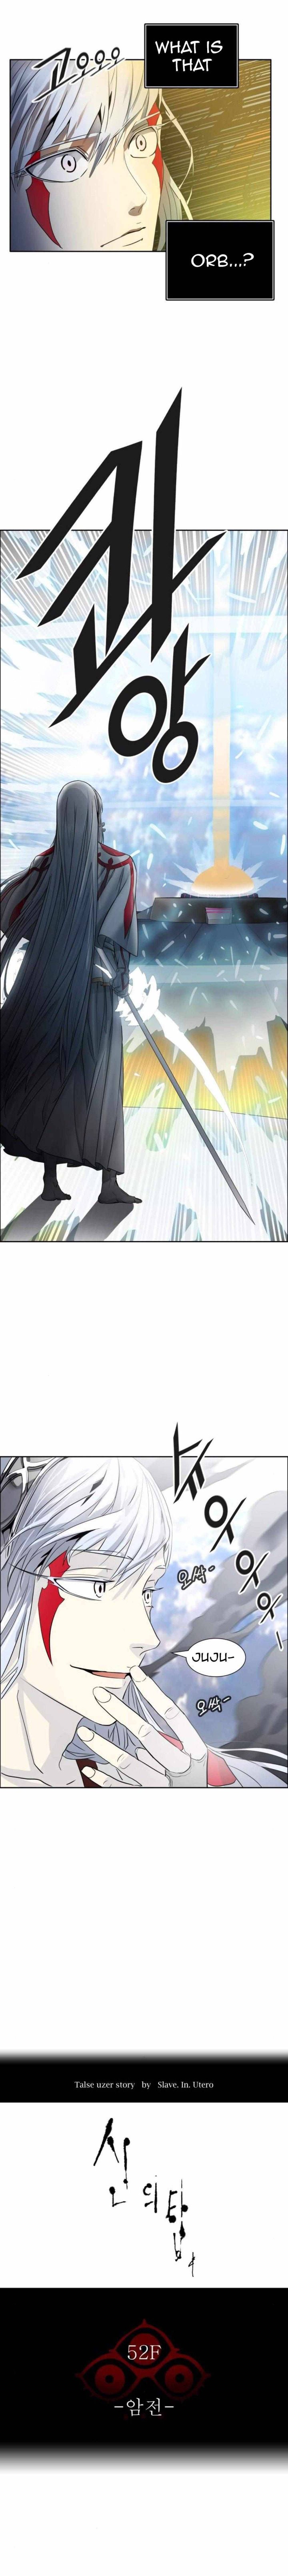 Tower Of God 499 7